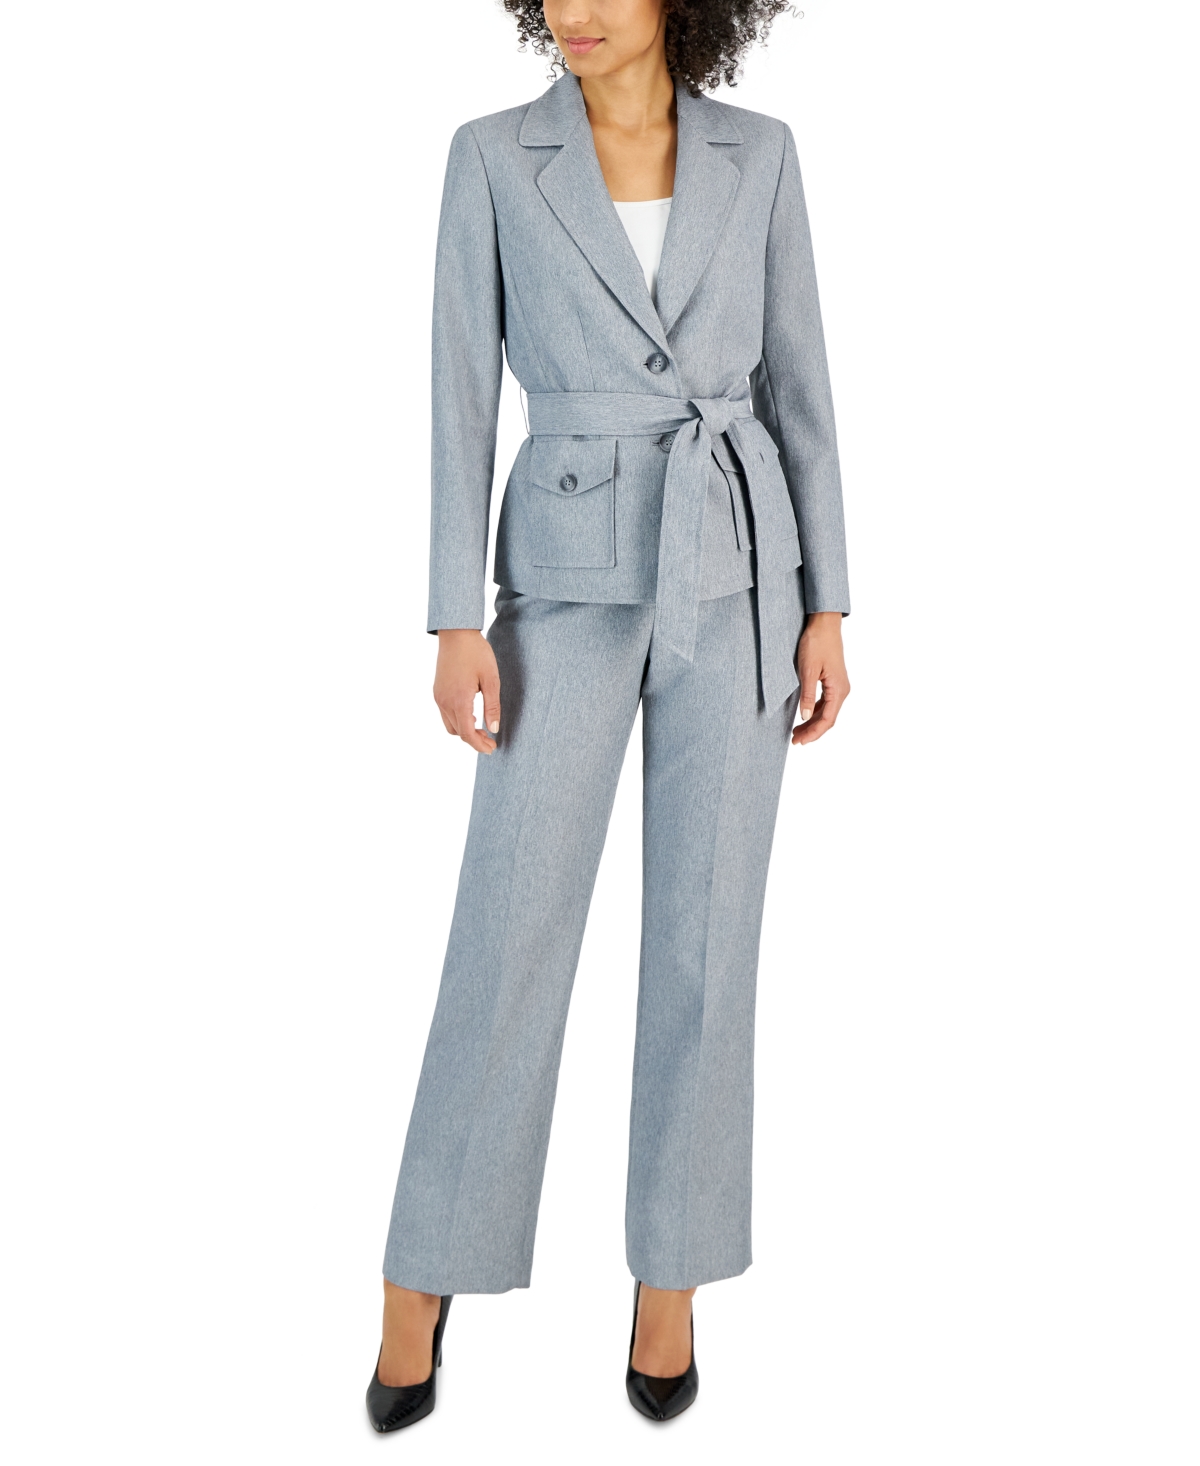 Le Suit Women's Belted Safari Jacket And Kate Pants, Regular & Petite Sizes In Light Grey Multi